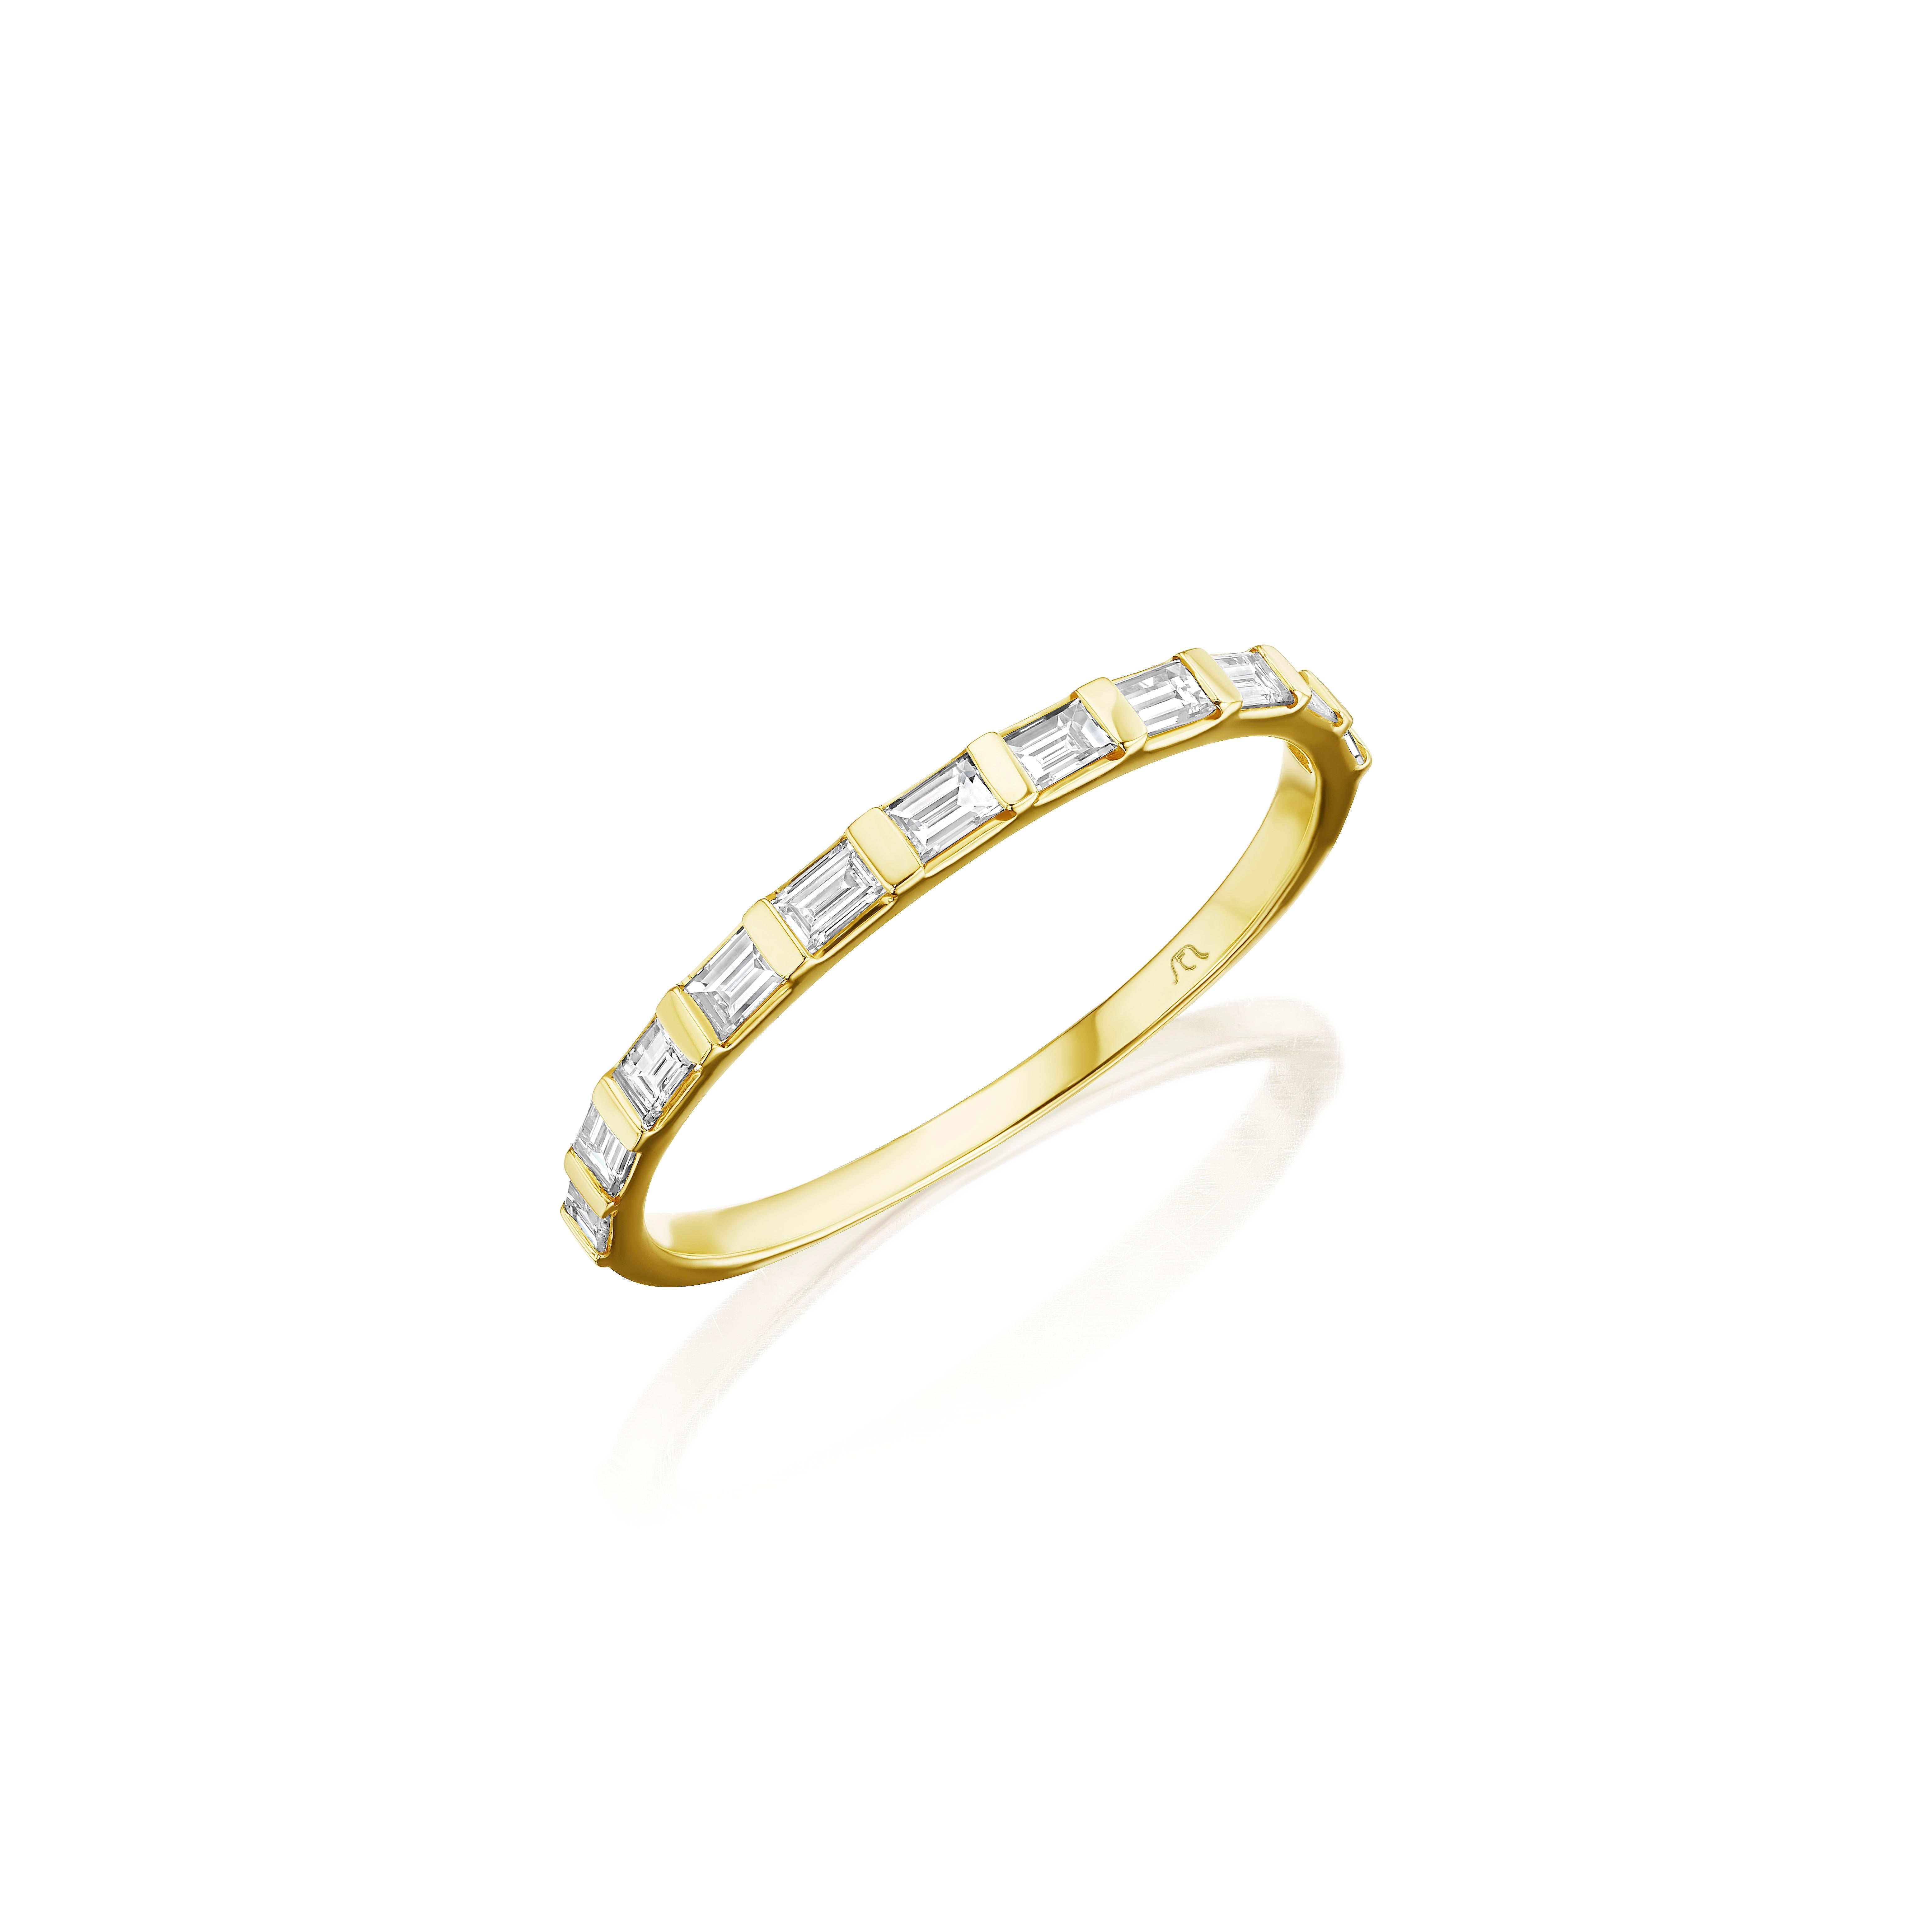 • Crafted in 14KT Yellow Gold, this band is made with 11 baguette cut diamonds. The diamonds are set half way down the band and are secured in a bar setting. The band has a combining total weight of approximately 0.39 carats. 
Worn beautifully on